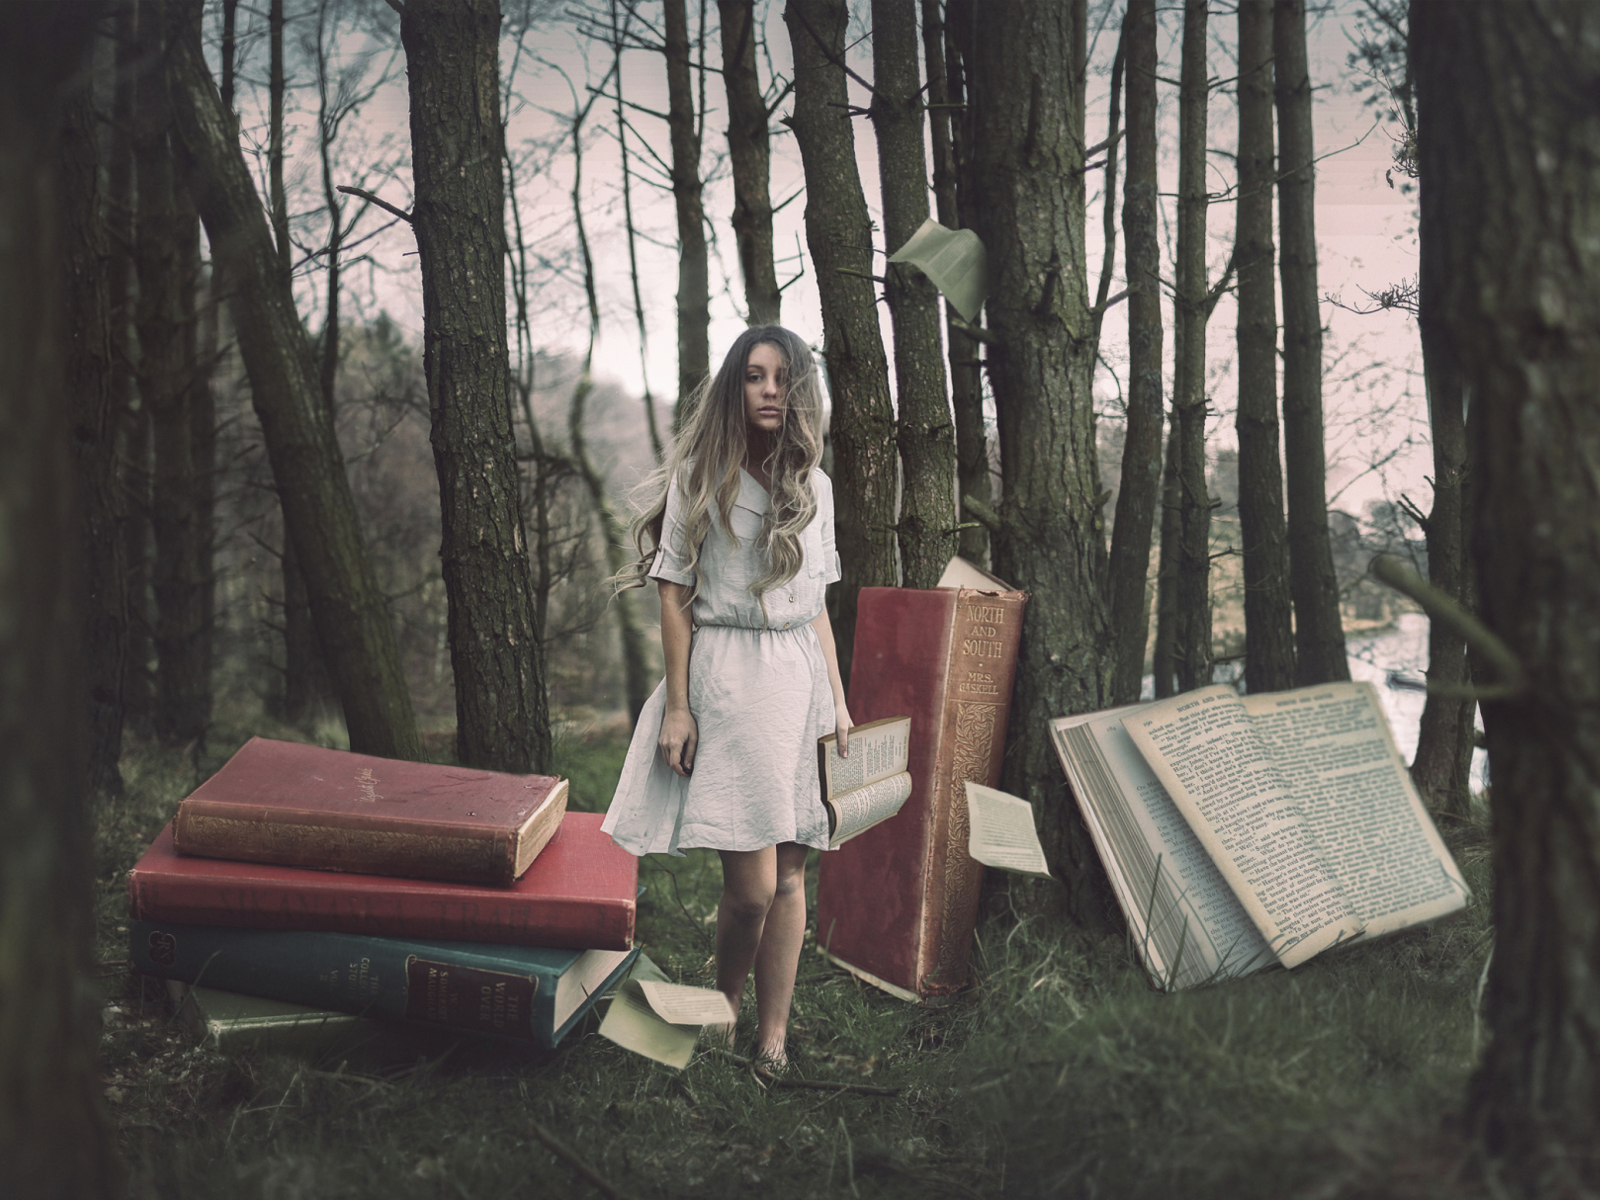 Forest Nymph Surrounded By Books wallpaper 1600x1200